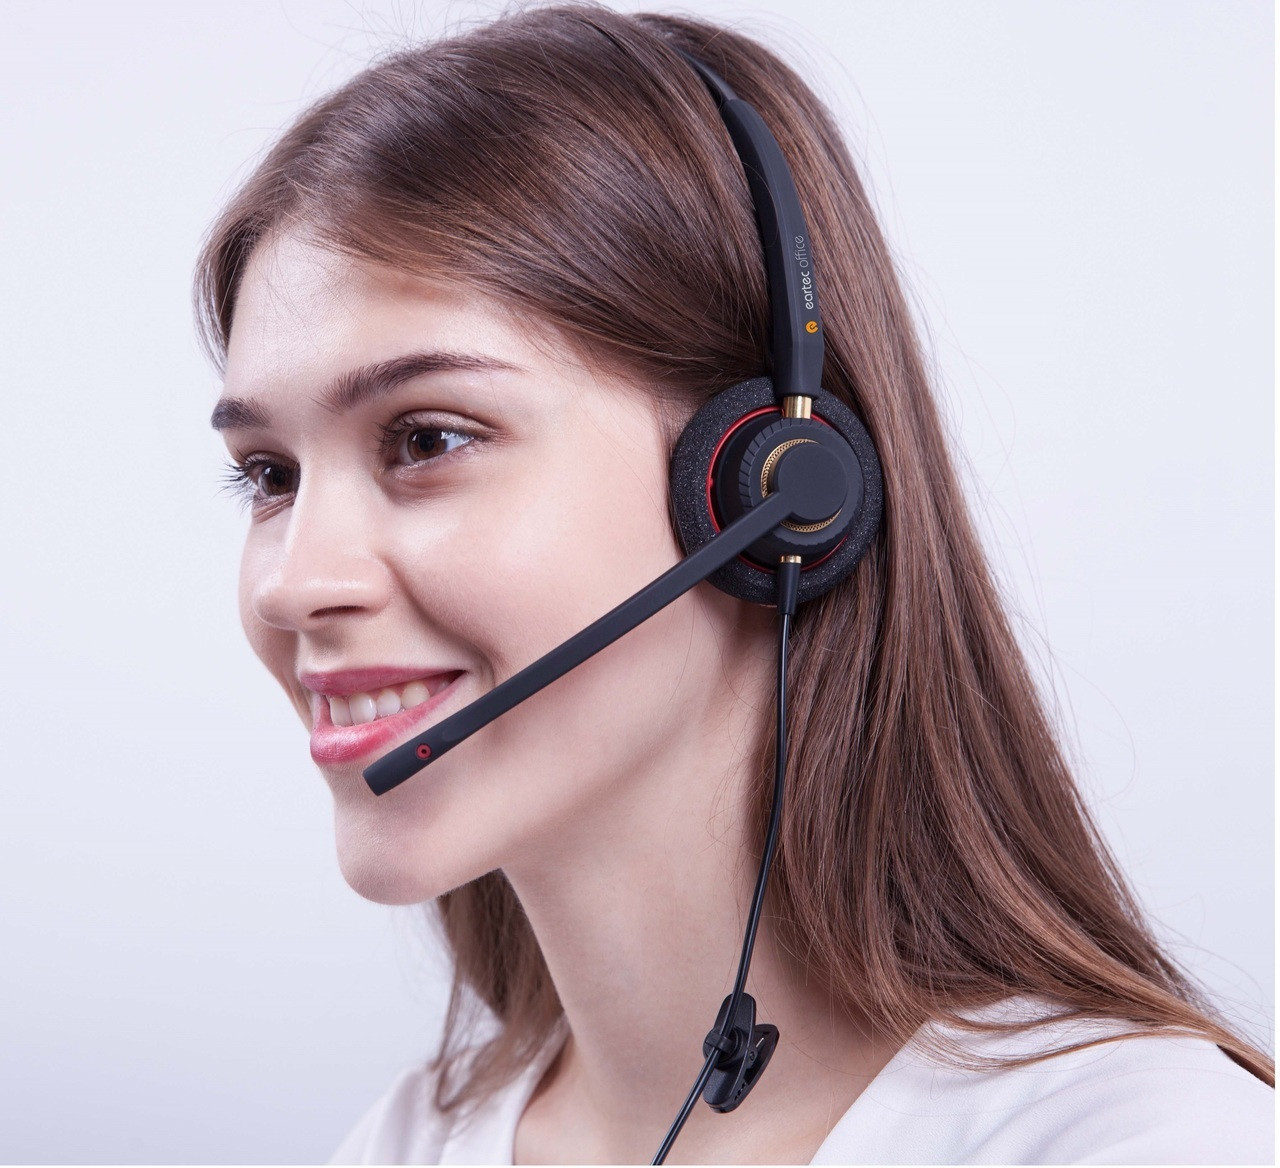 Aastra 632d Dect Phone Headset - EAR510D